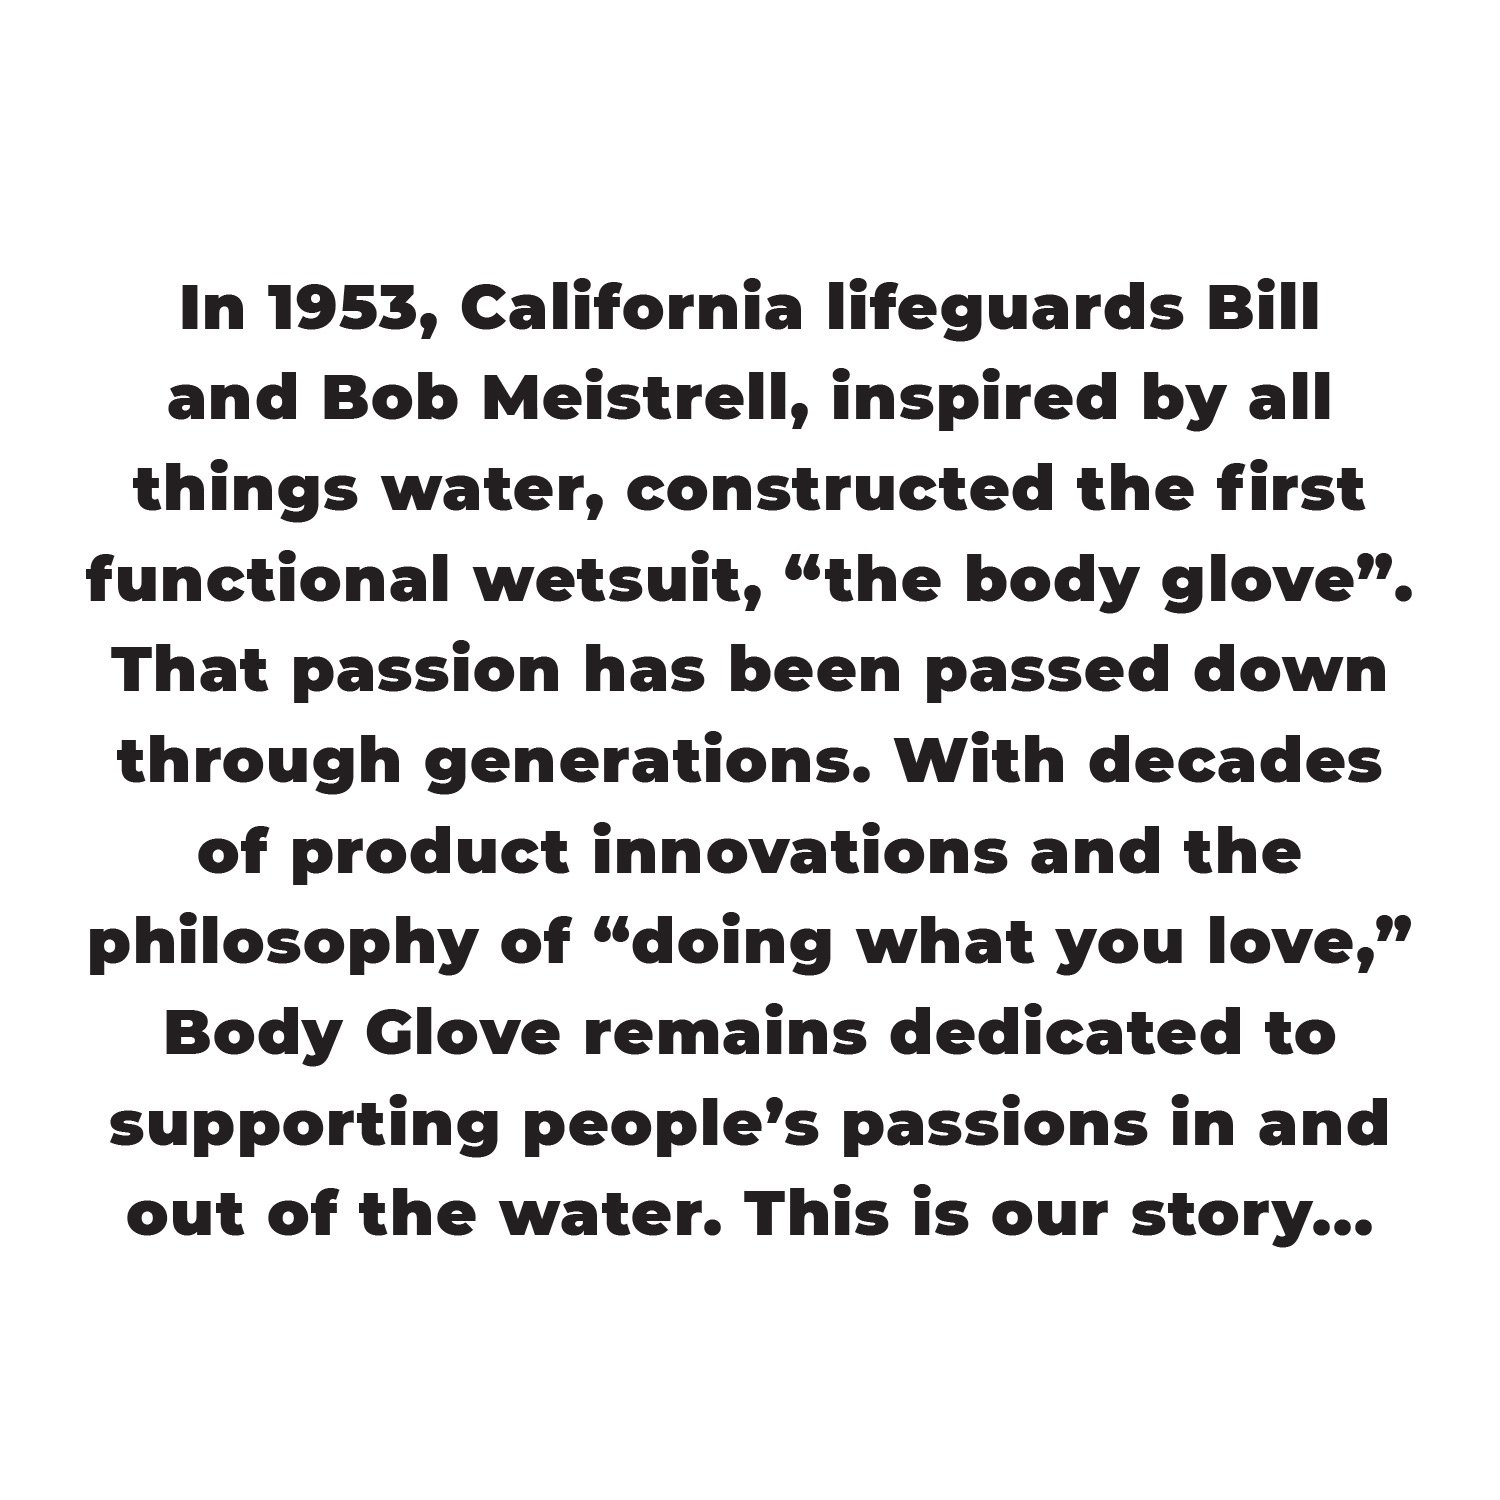 In 1953, California lifeguards Bill and Bob Meistrell, inspired by all things water, constructed the first functional wetsuit, 'the body glove'. That passion has been passed down through generations. With decades of product innovations and the philosophy of 'doing what you love,' Body Glove remains dedicated to supporting people's passions in and out of the water. This is our story...